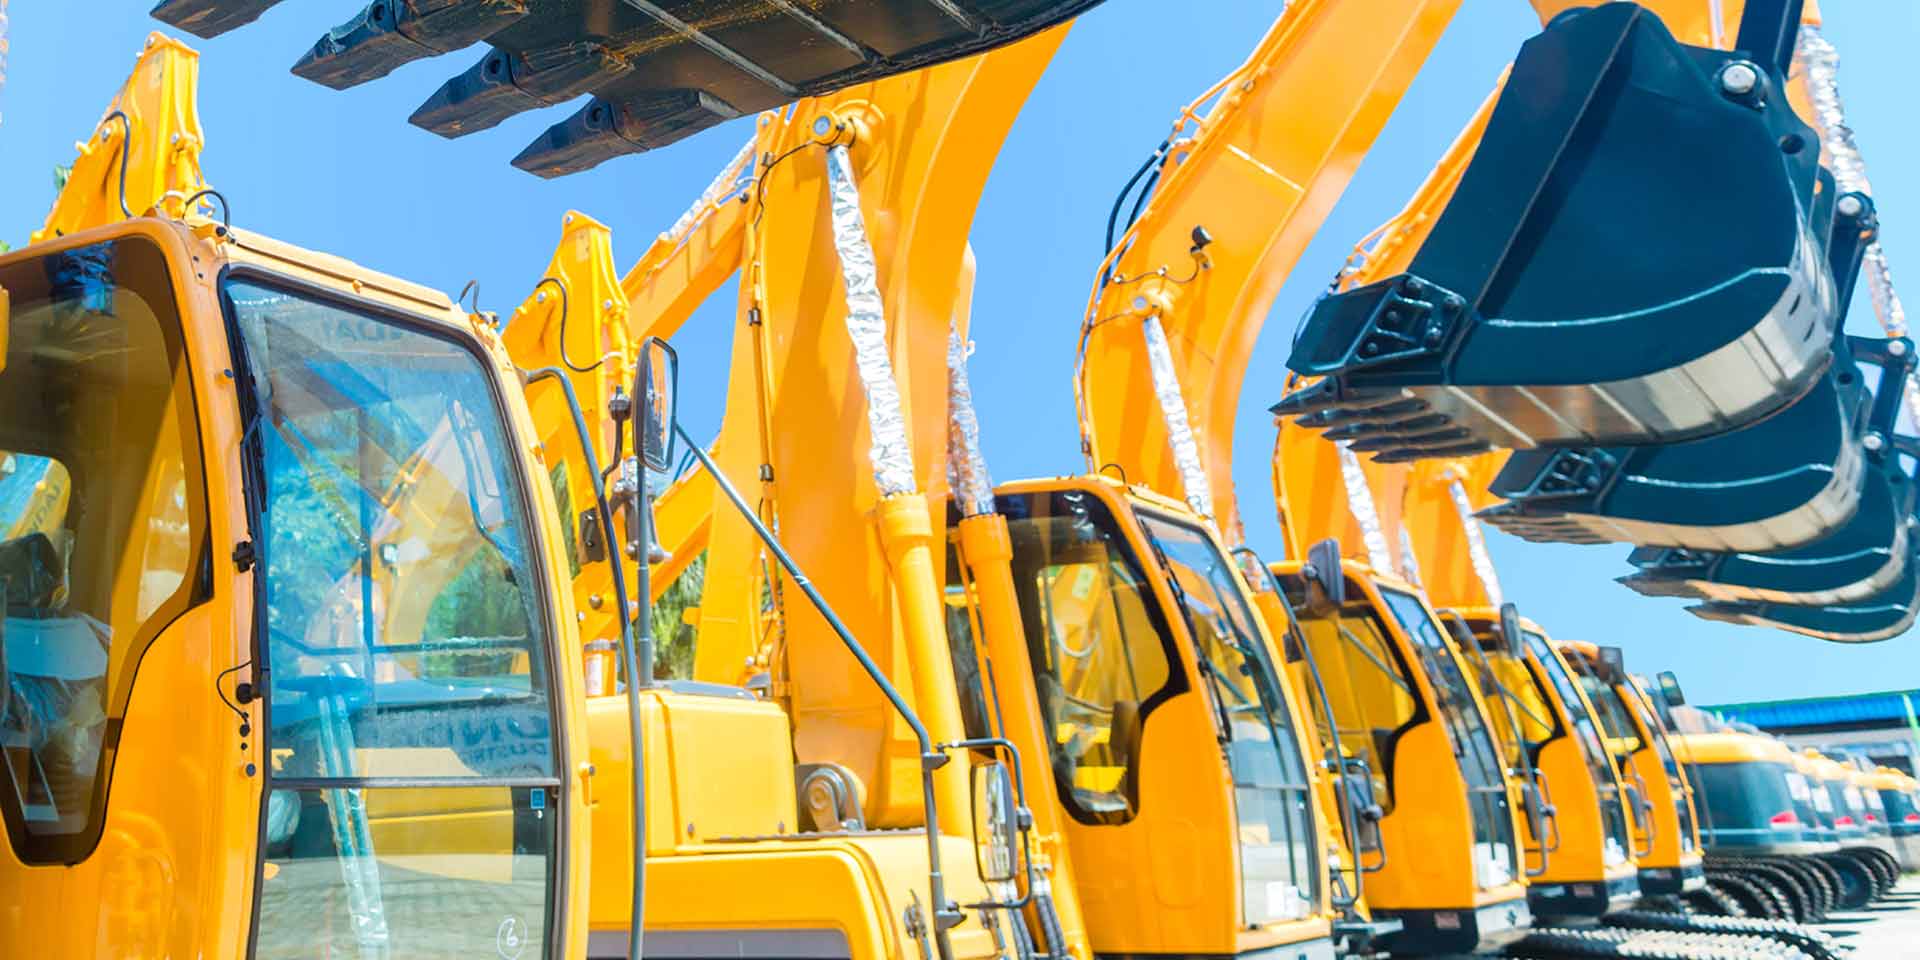 Several construction vehicles are lined up and ready to use after having been purchased through equipment financing